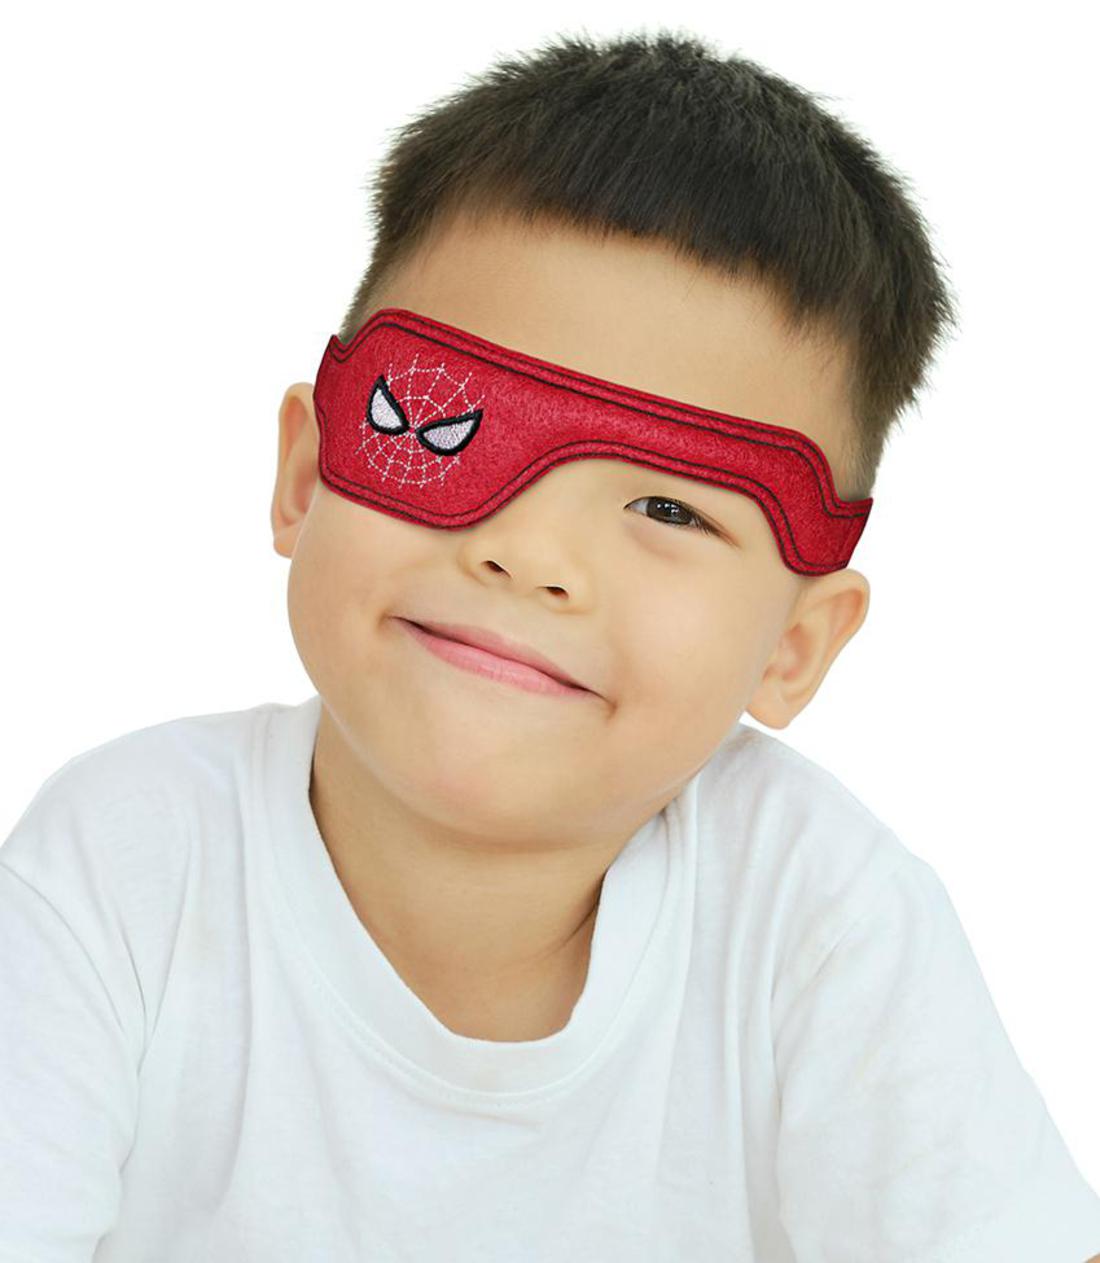 Eye Patches by Patch Pals - Spiderman Poggle Eye Patch For Children